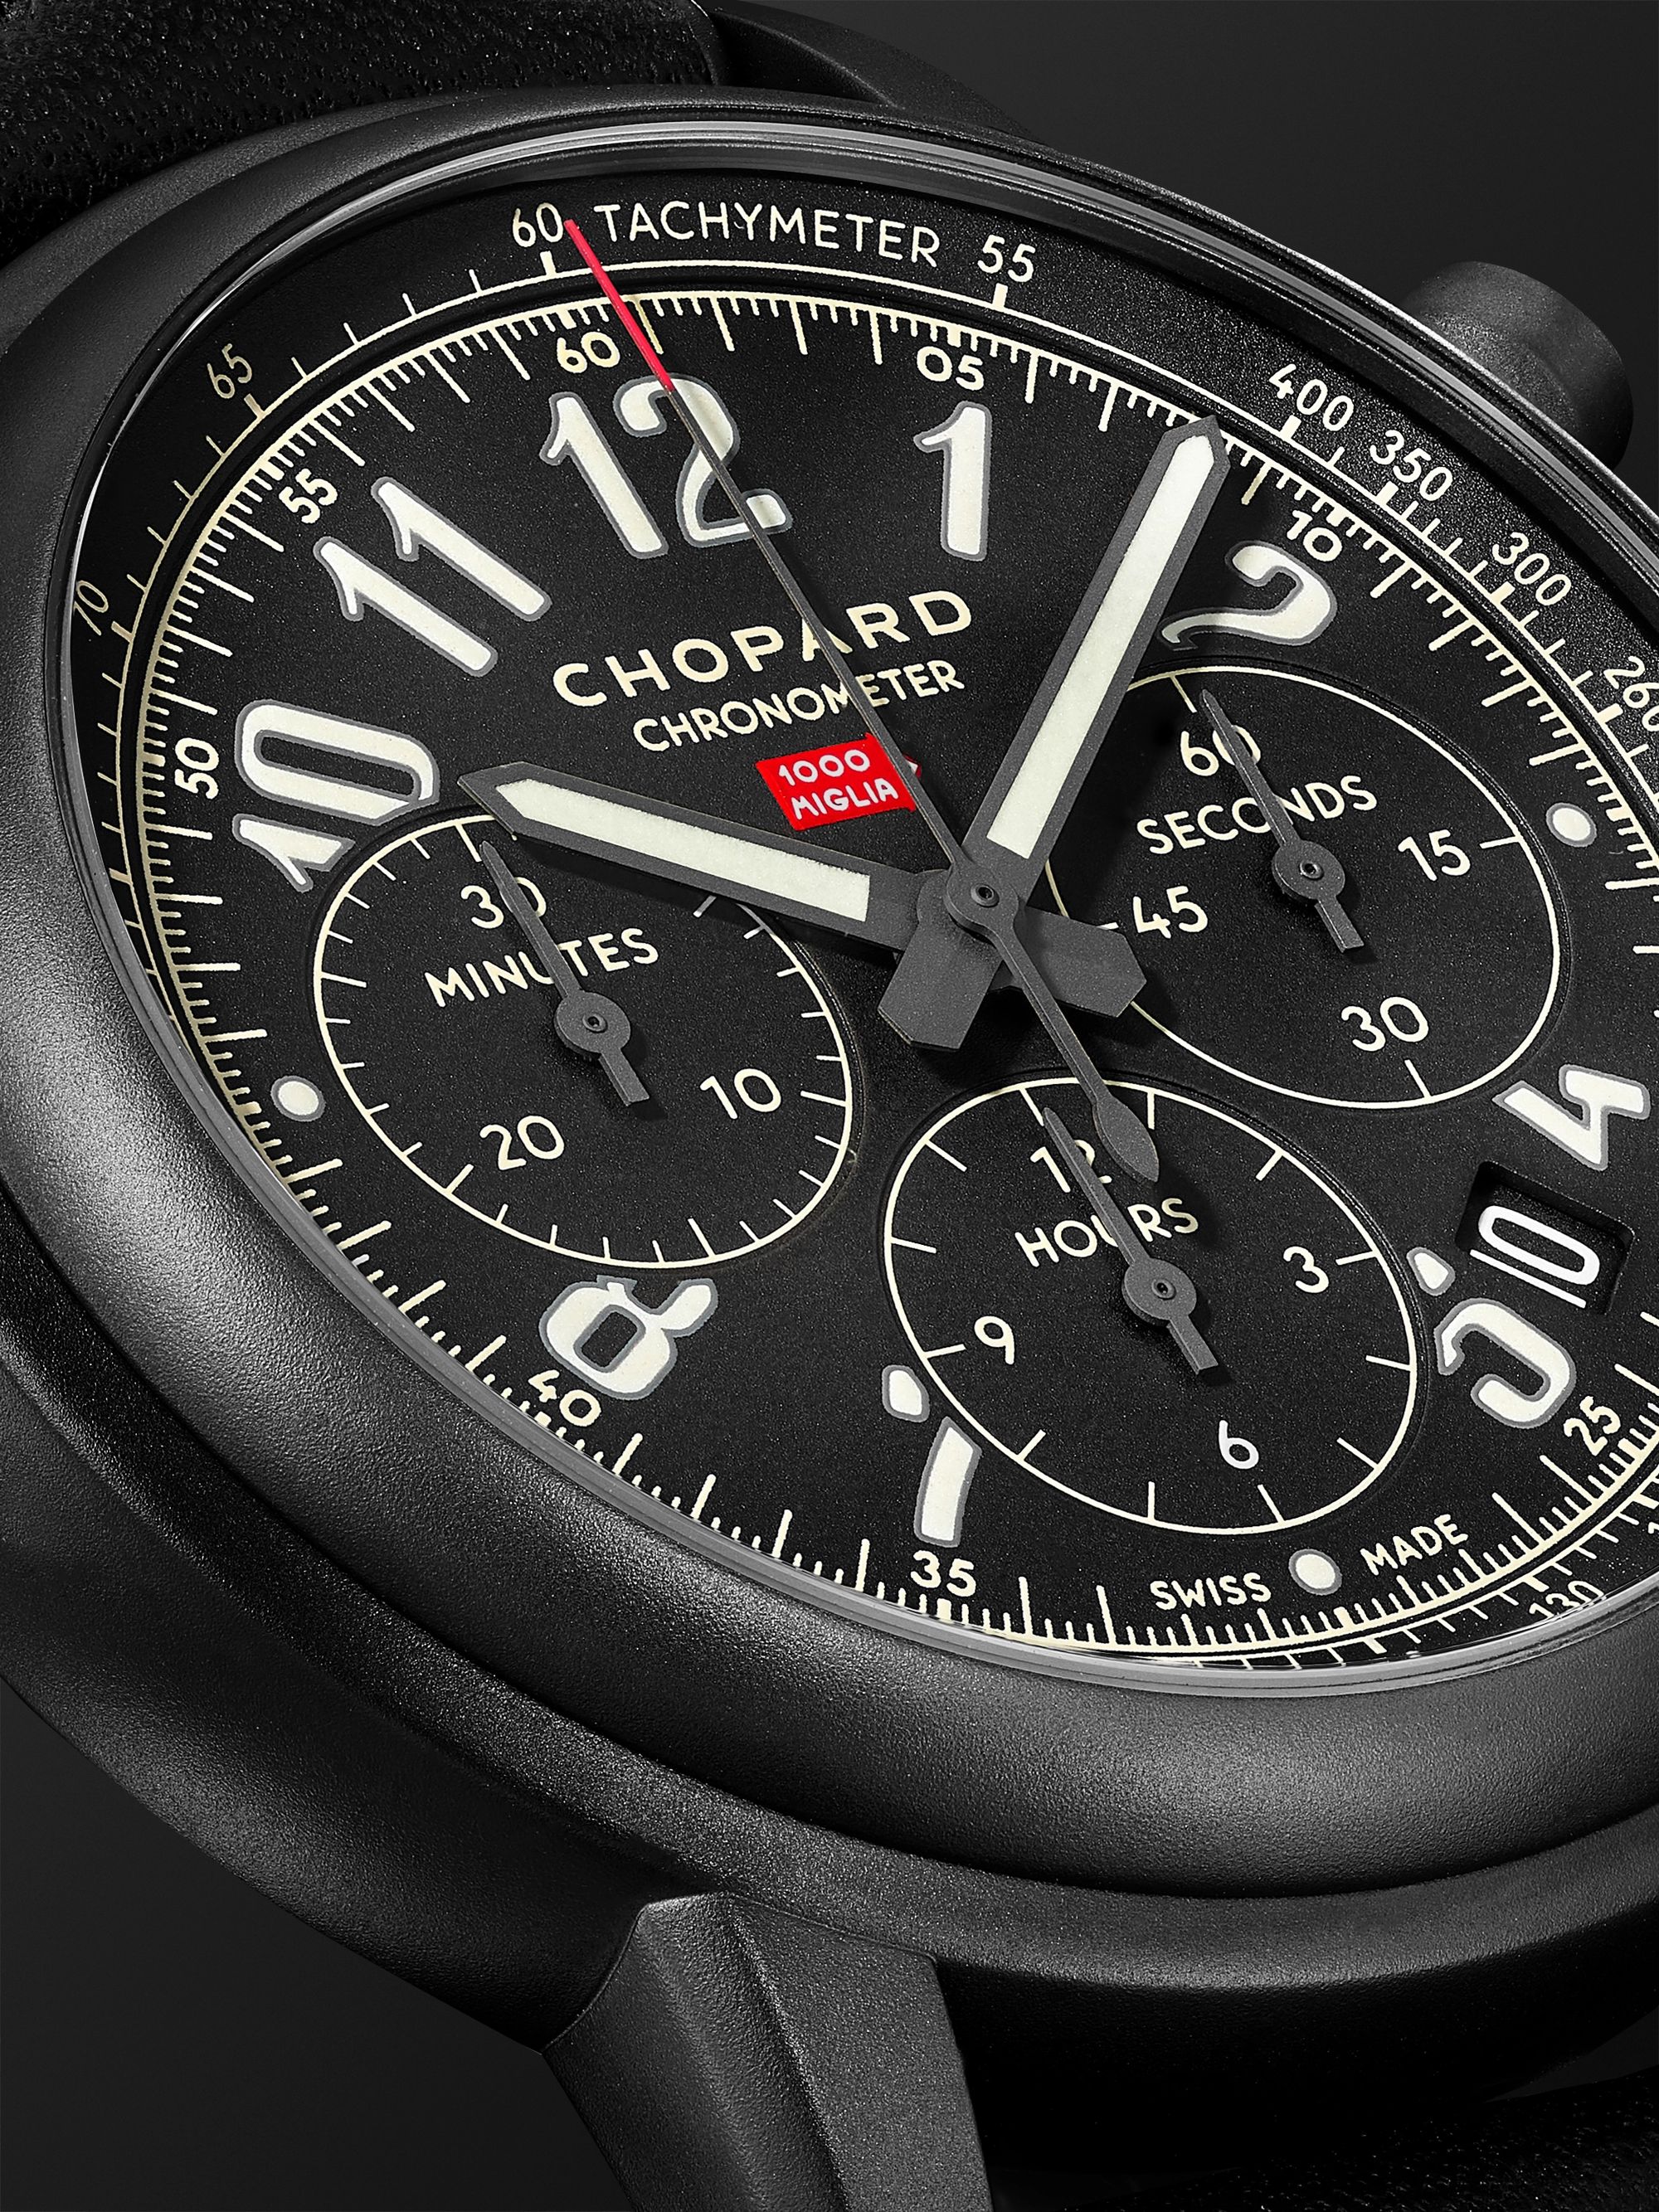 CHOPARD Mille Miglia 2020 Race Edition Limited Edition Automatic Chronograph 42mm Stainless Steel and Leather Watch, Ref. No.